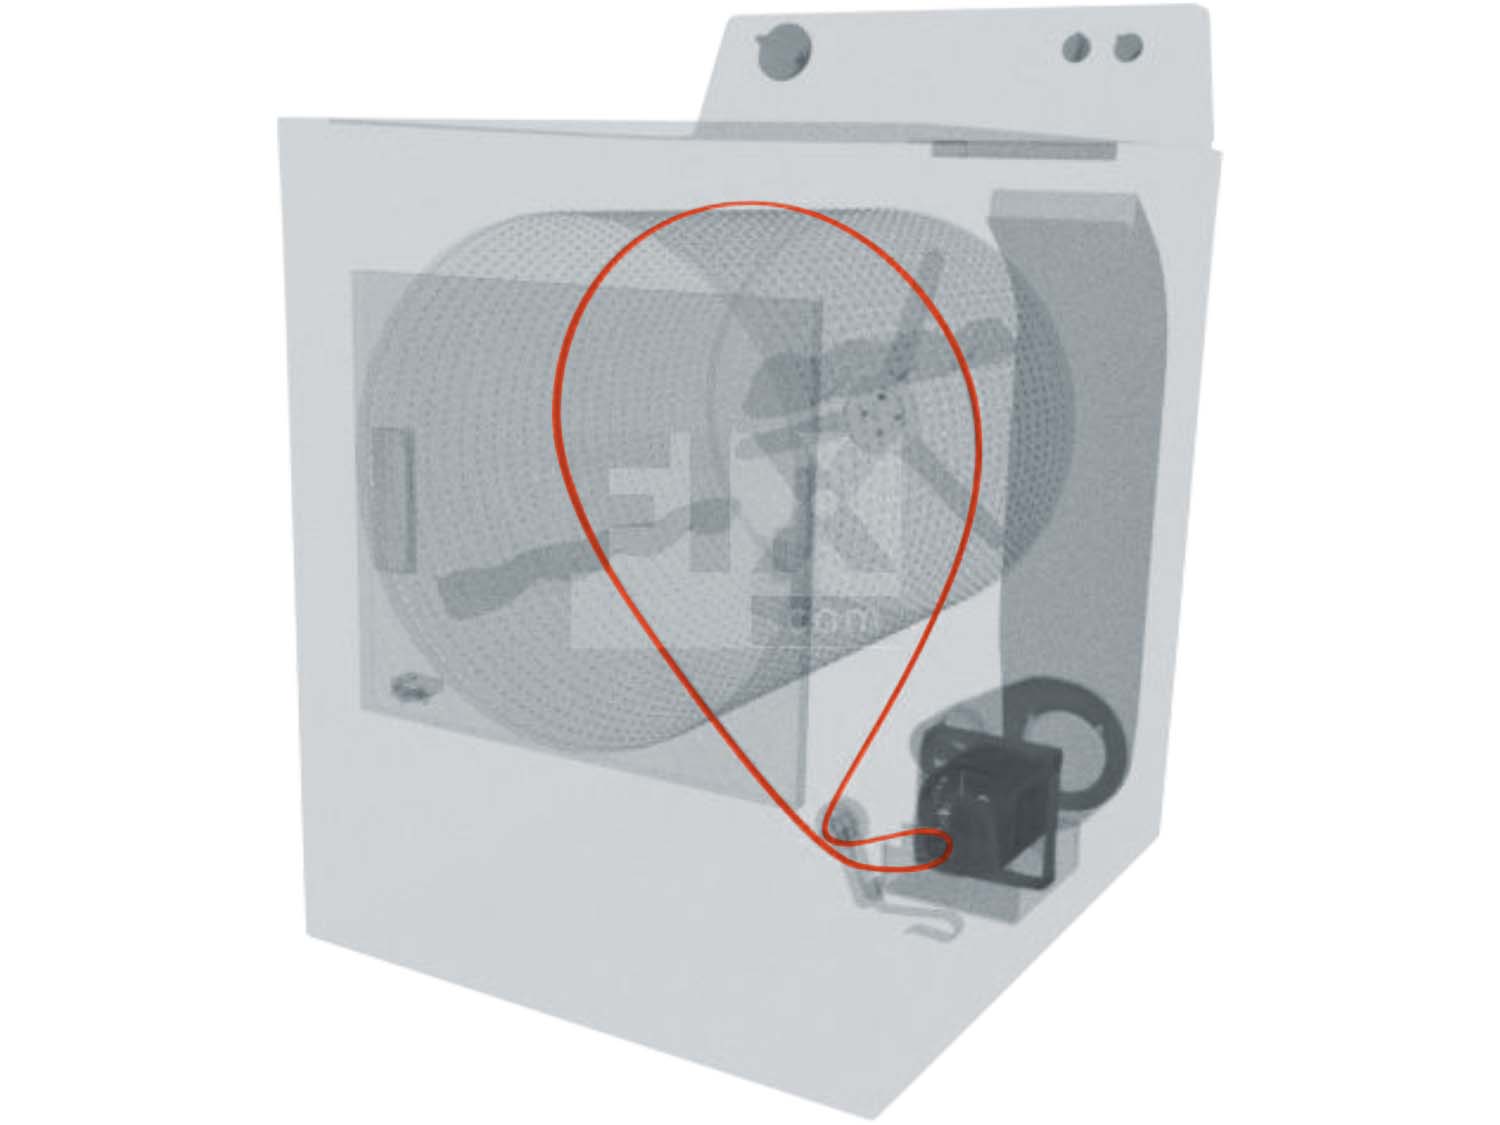 A 3D diagram showing the components of a dryer and specifying the location of the drive belt